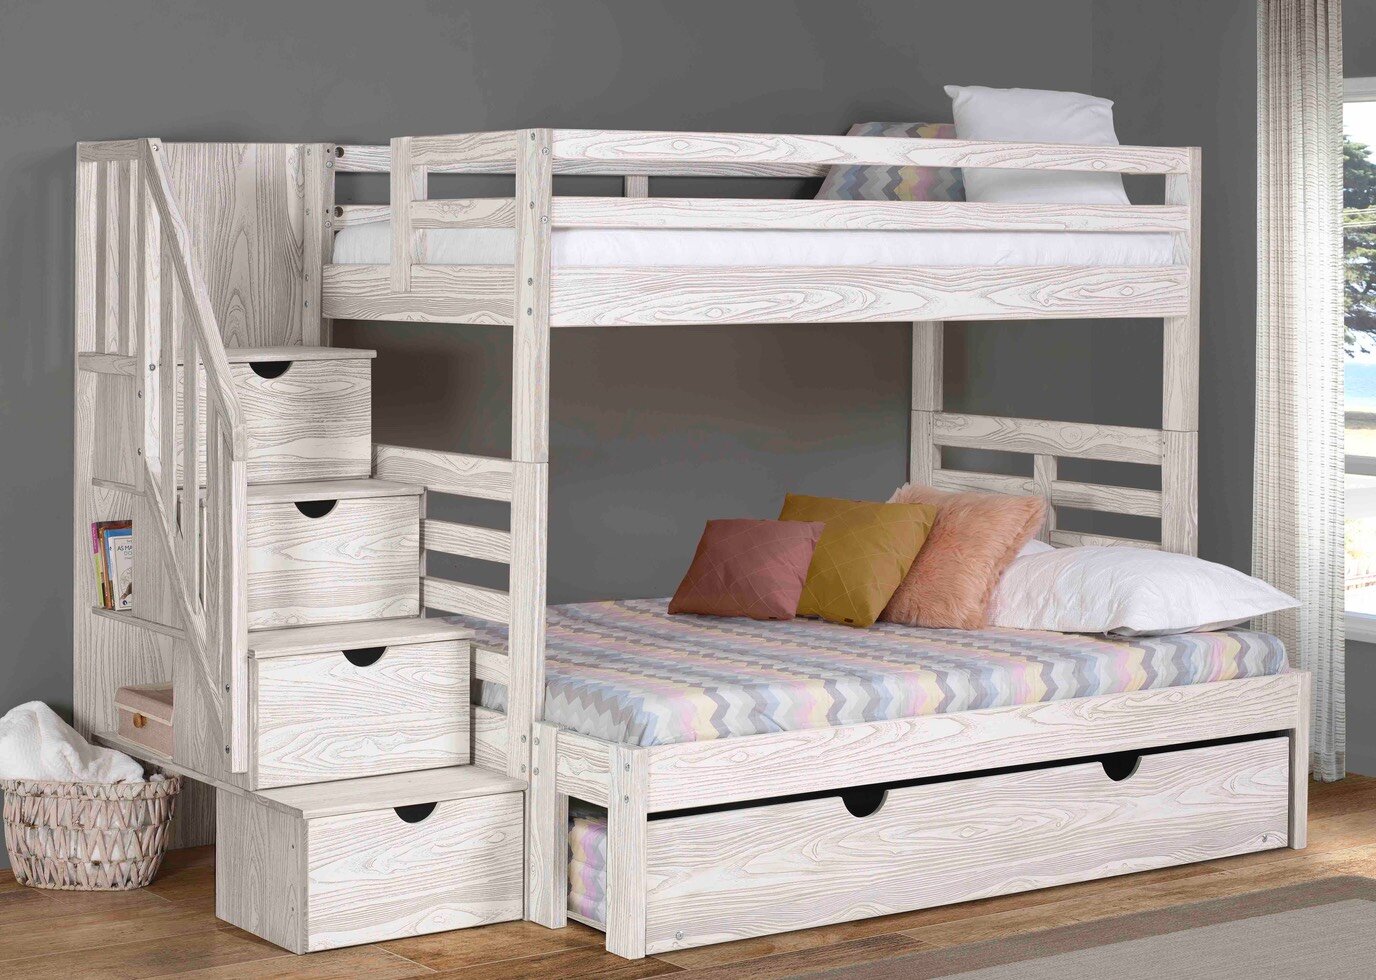 Solid Wood Bunk Bed With Staircase, Birch Wood Bunk Beds